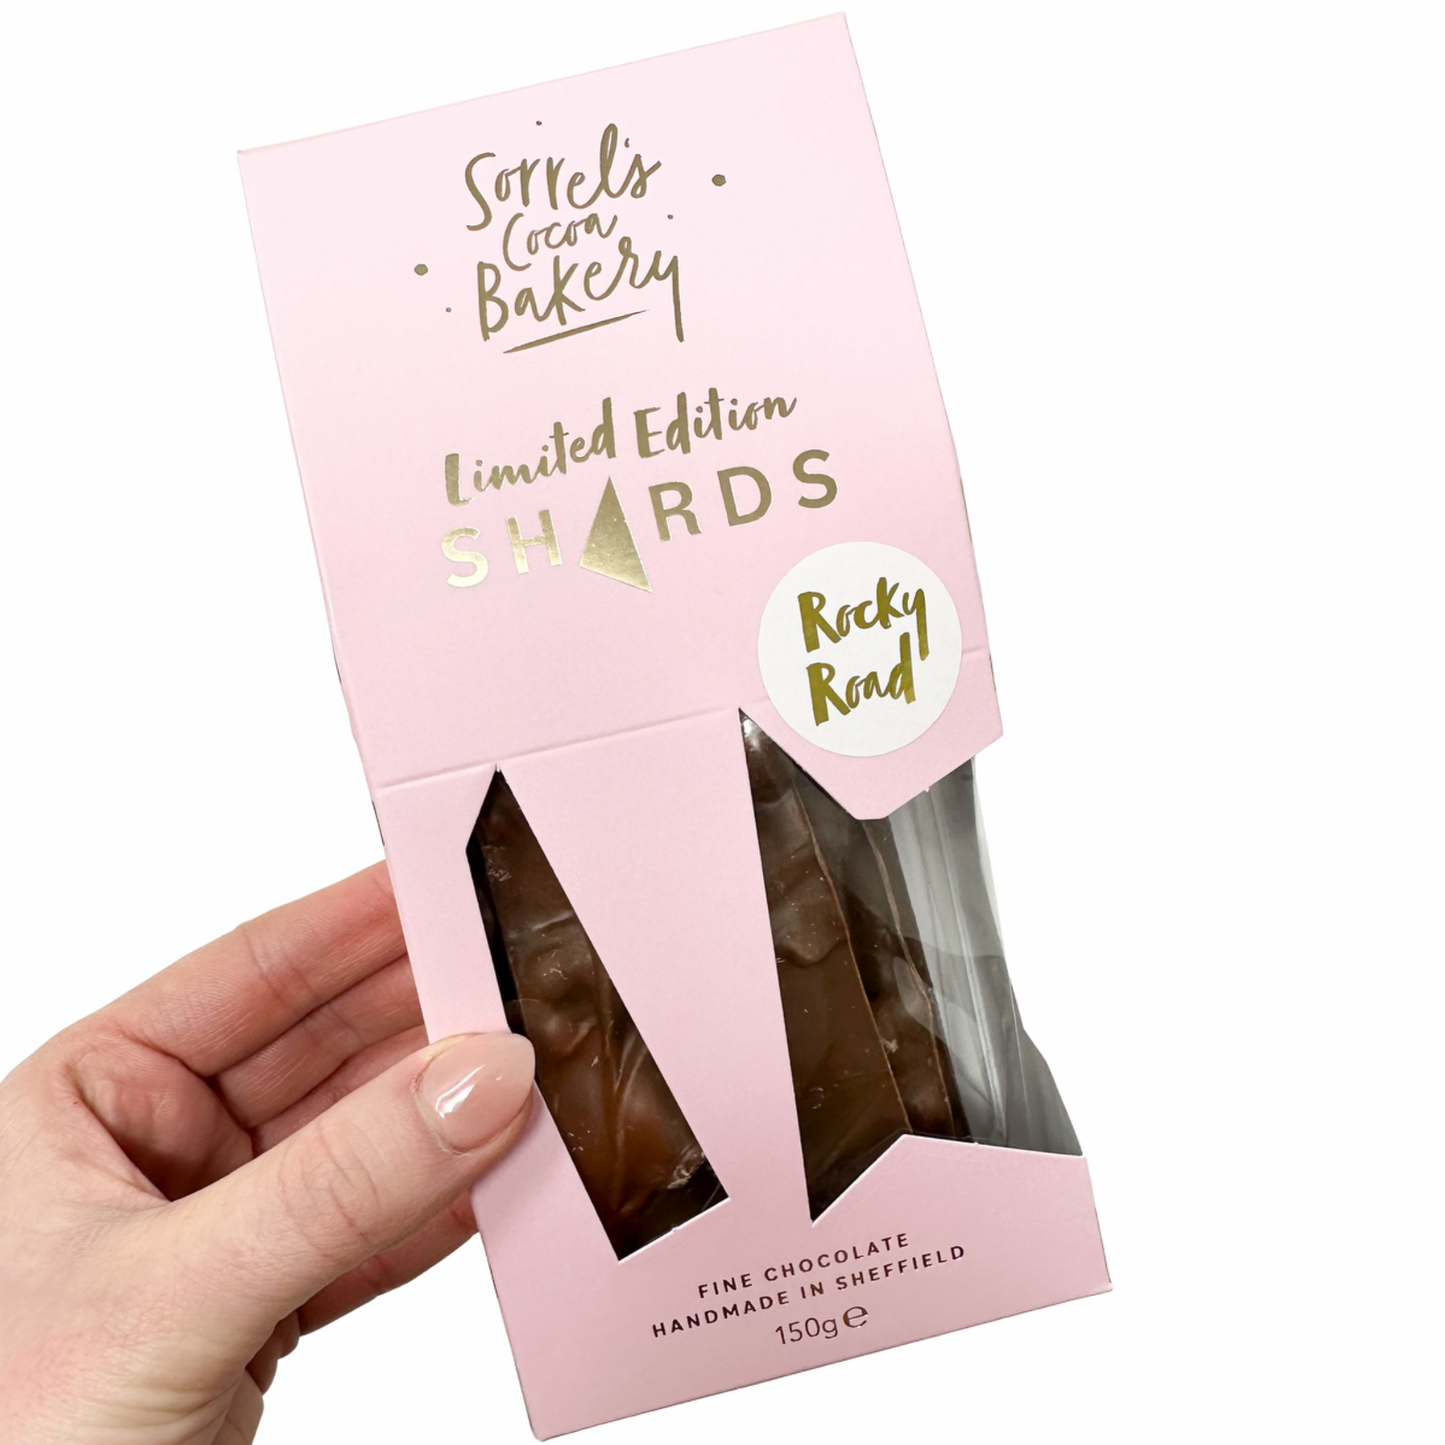 Handmade Chocolate Shards - Choose Your Flavour